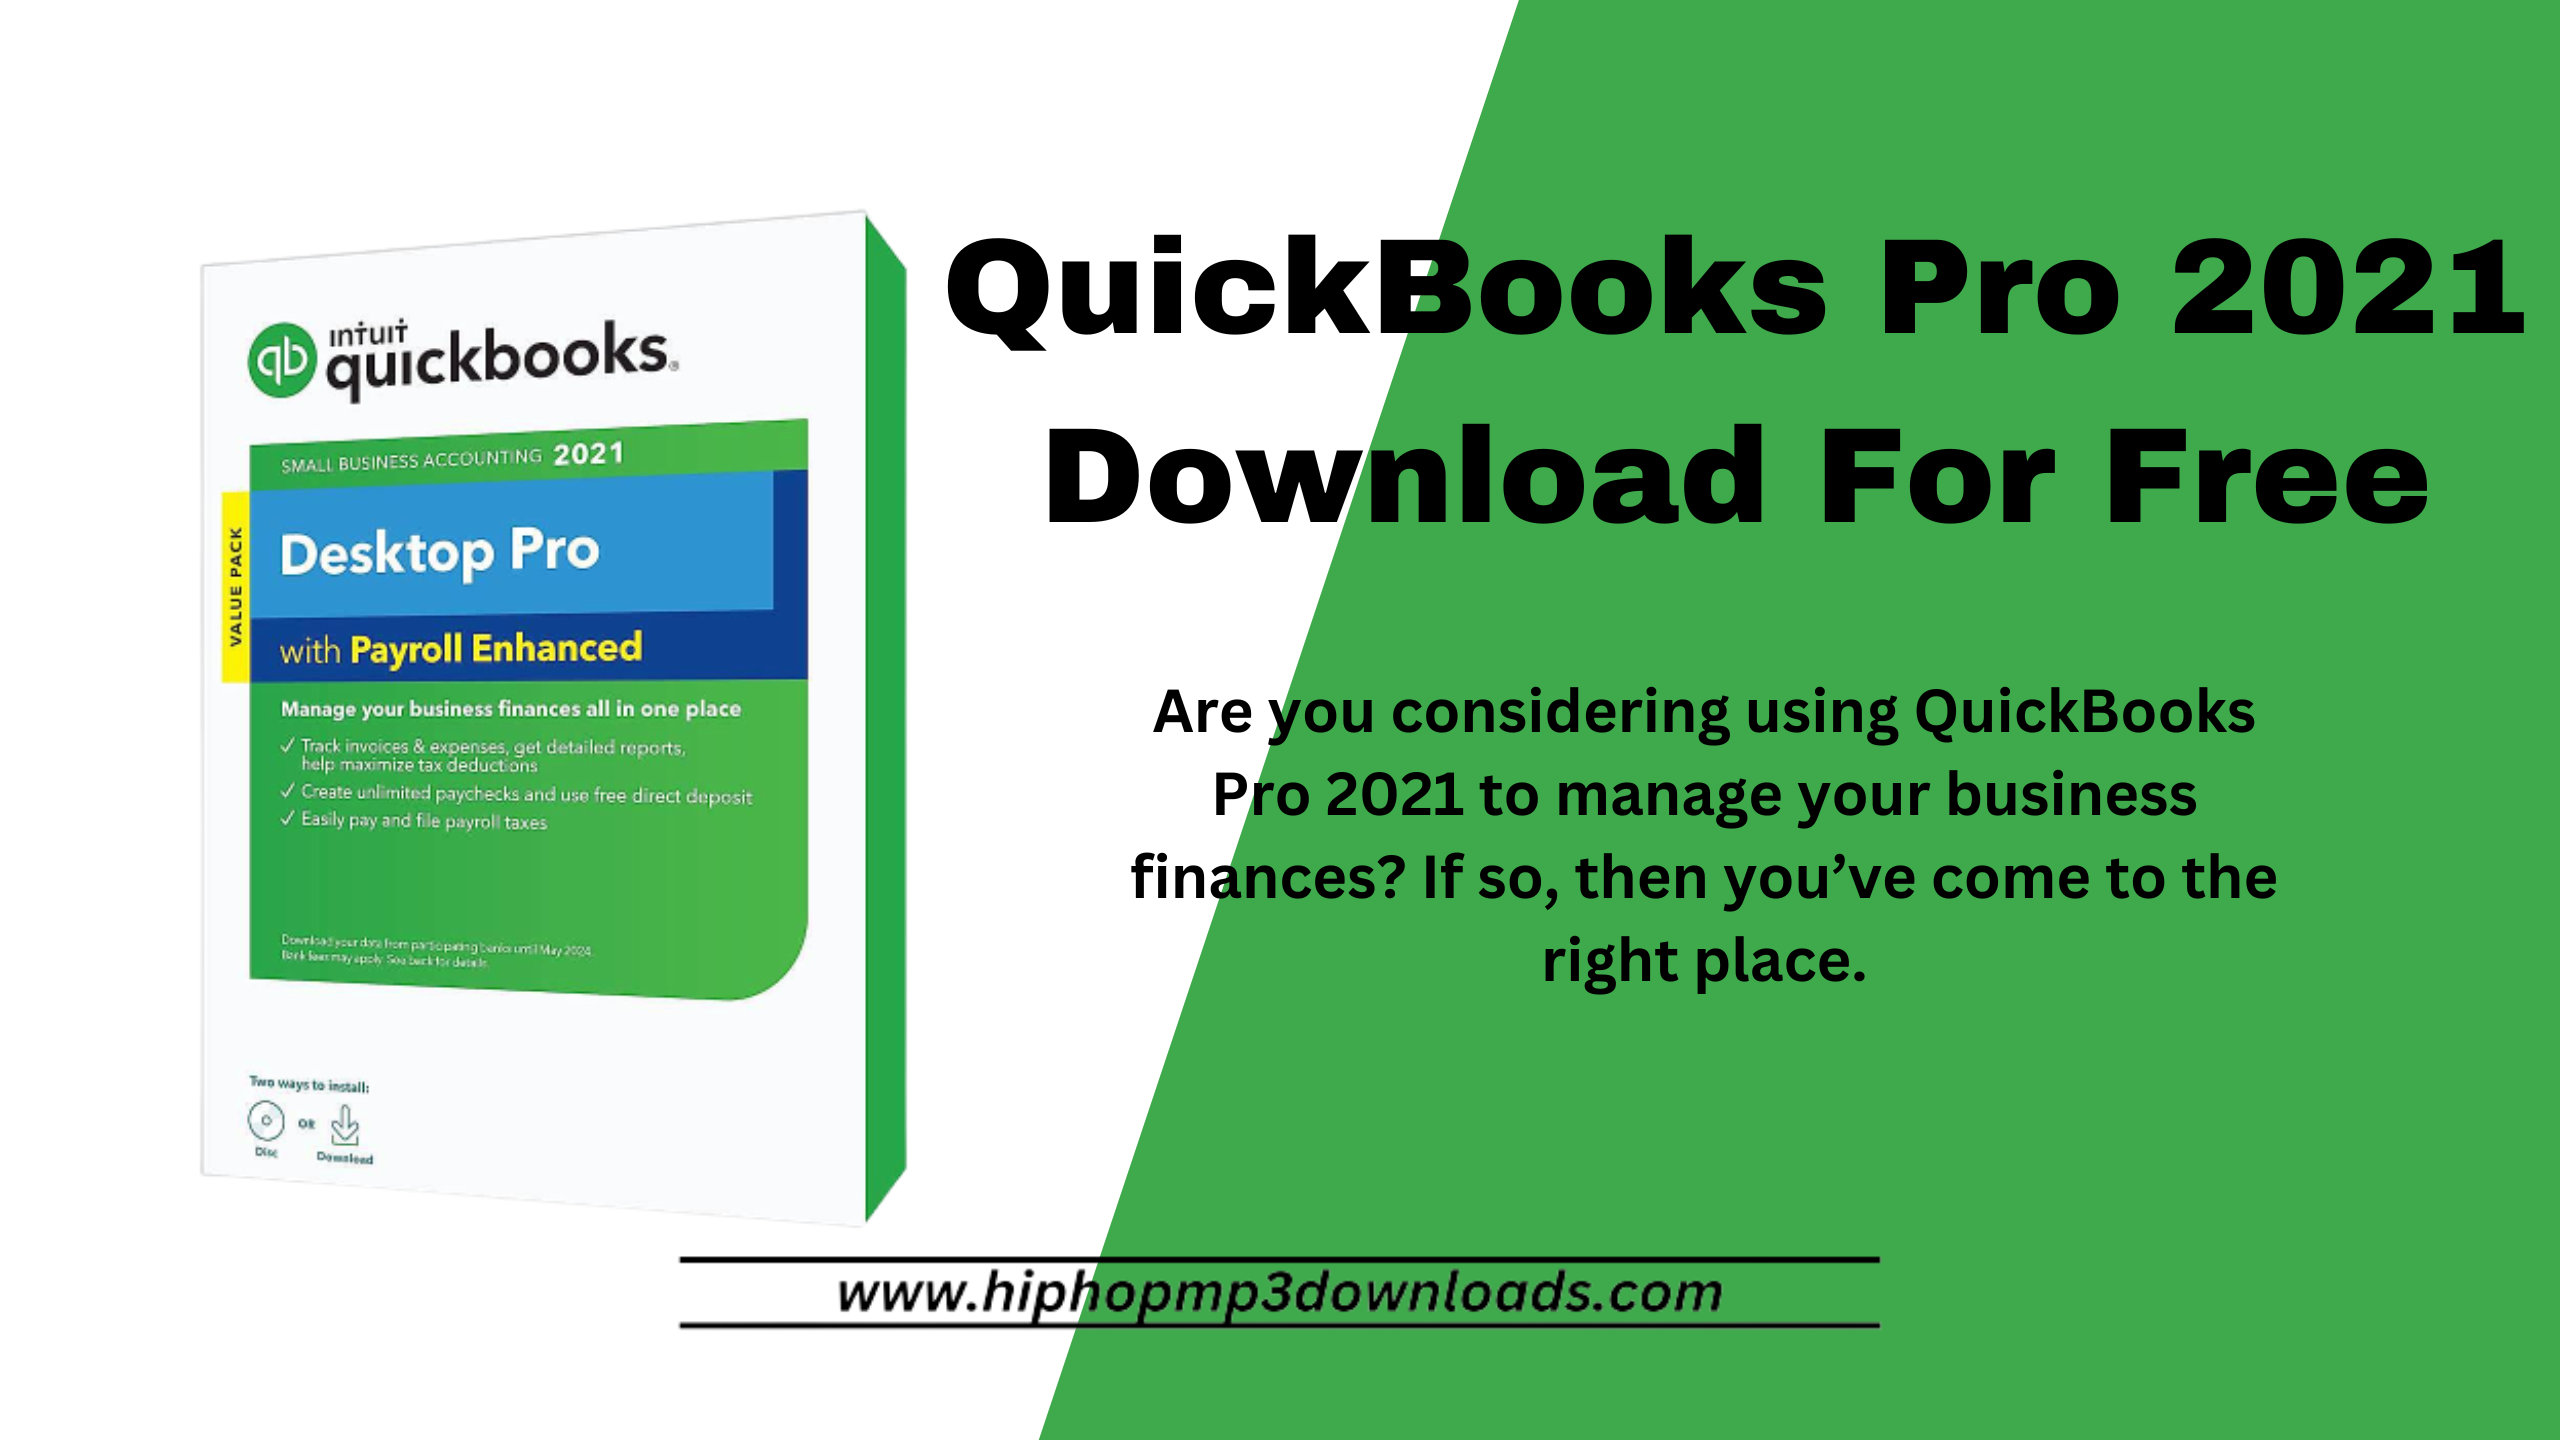 QuickBooks Pro Download For Free